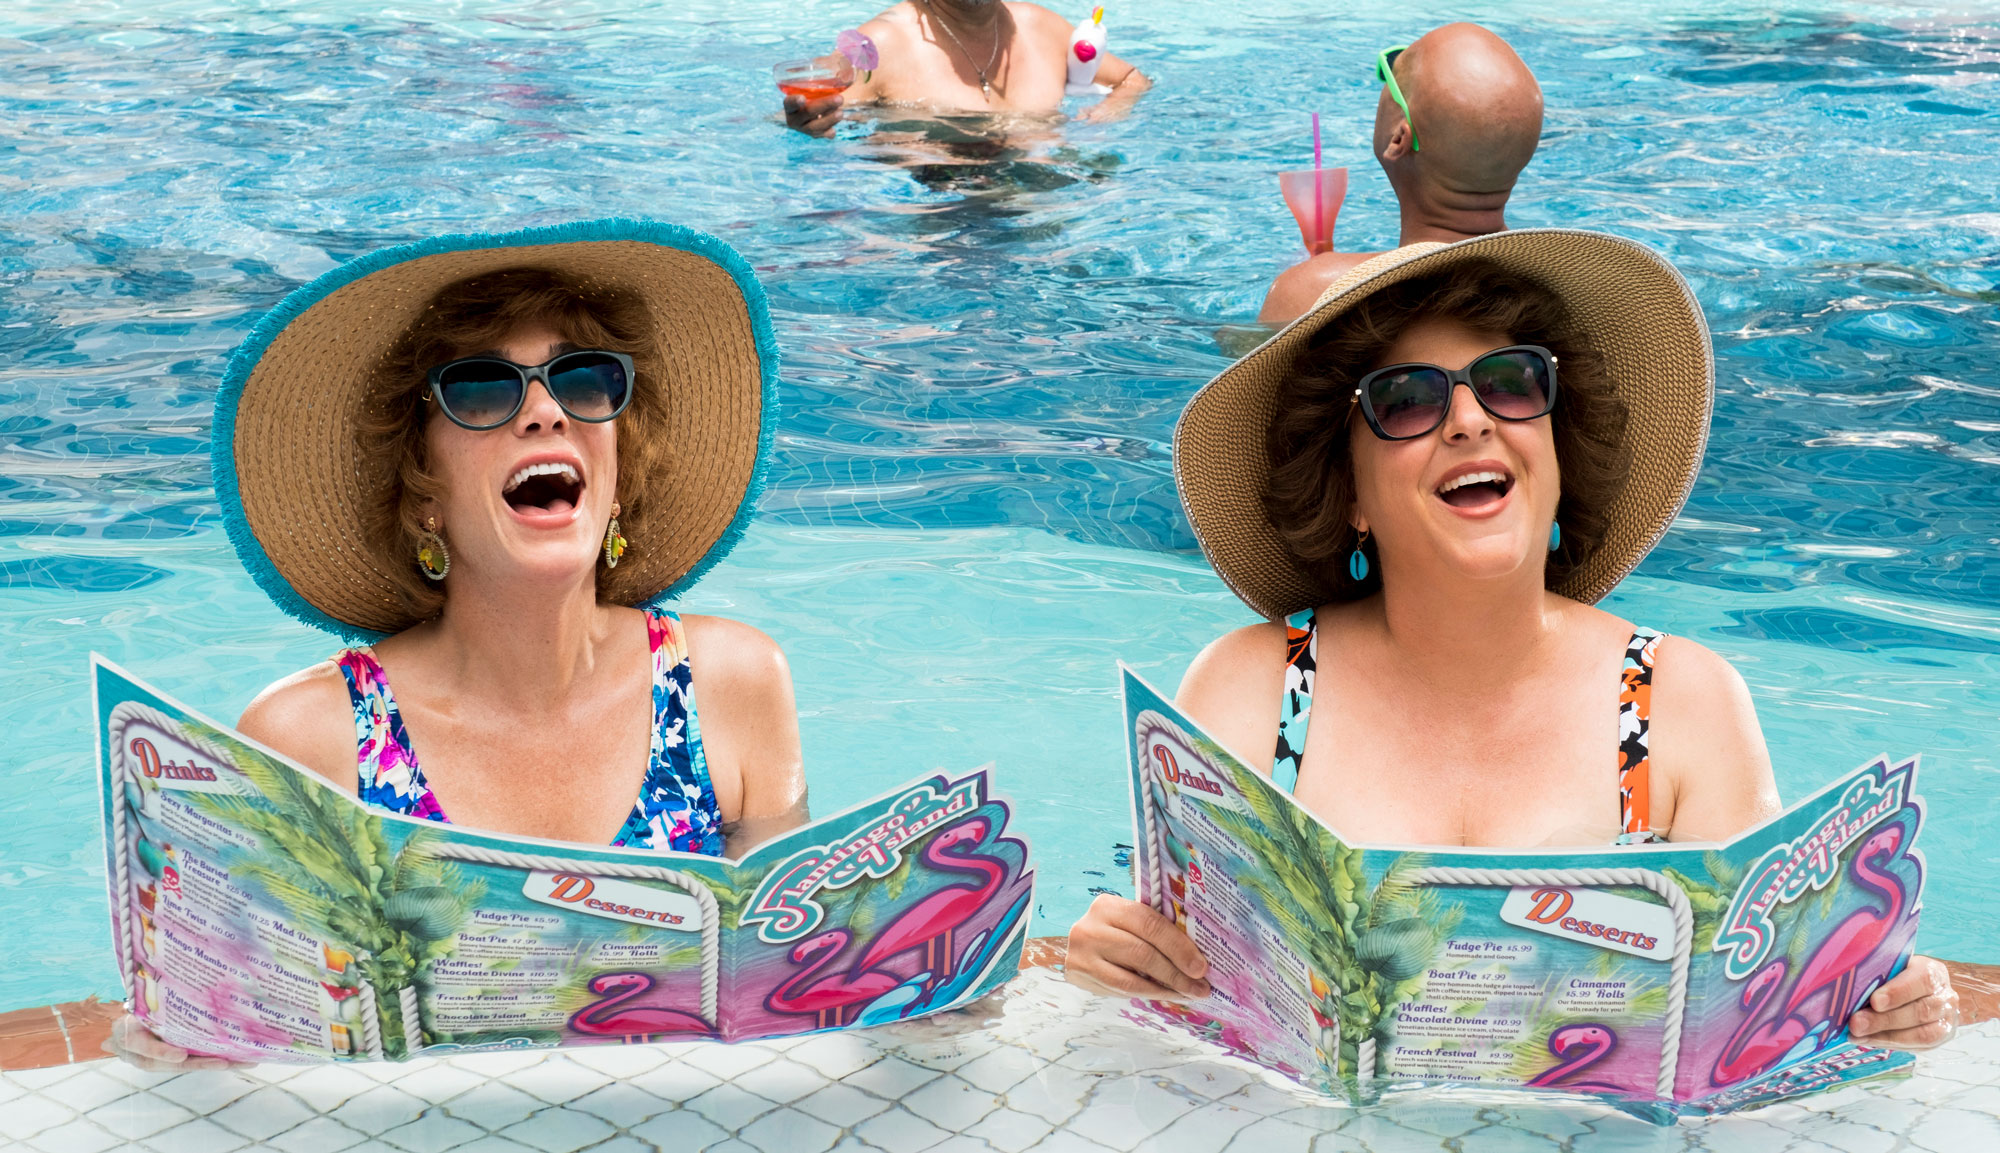 Kristen Wiig and Annie Mumolo in "Barb and Star Go to Vista Del Mar"